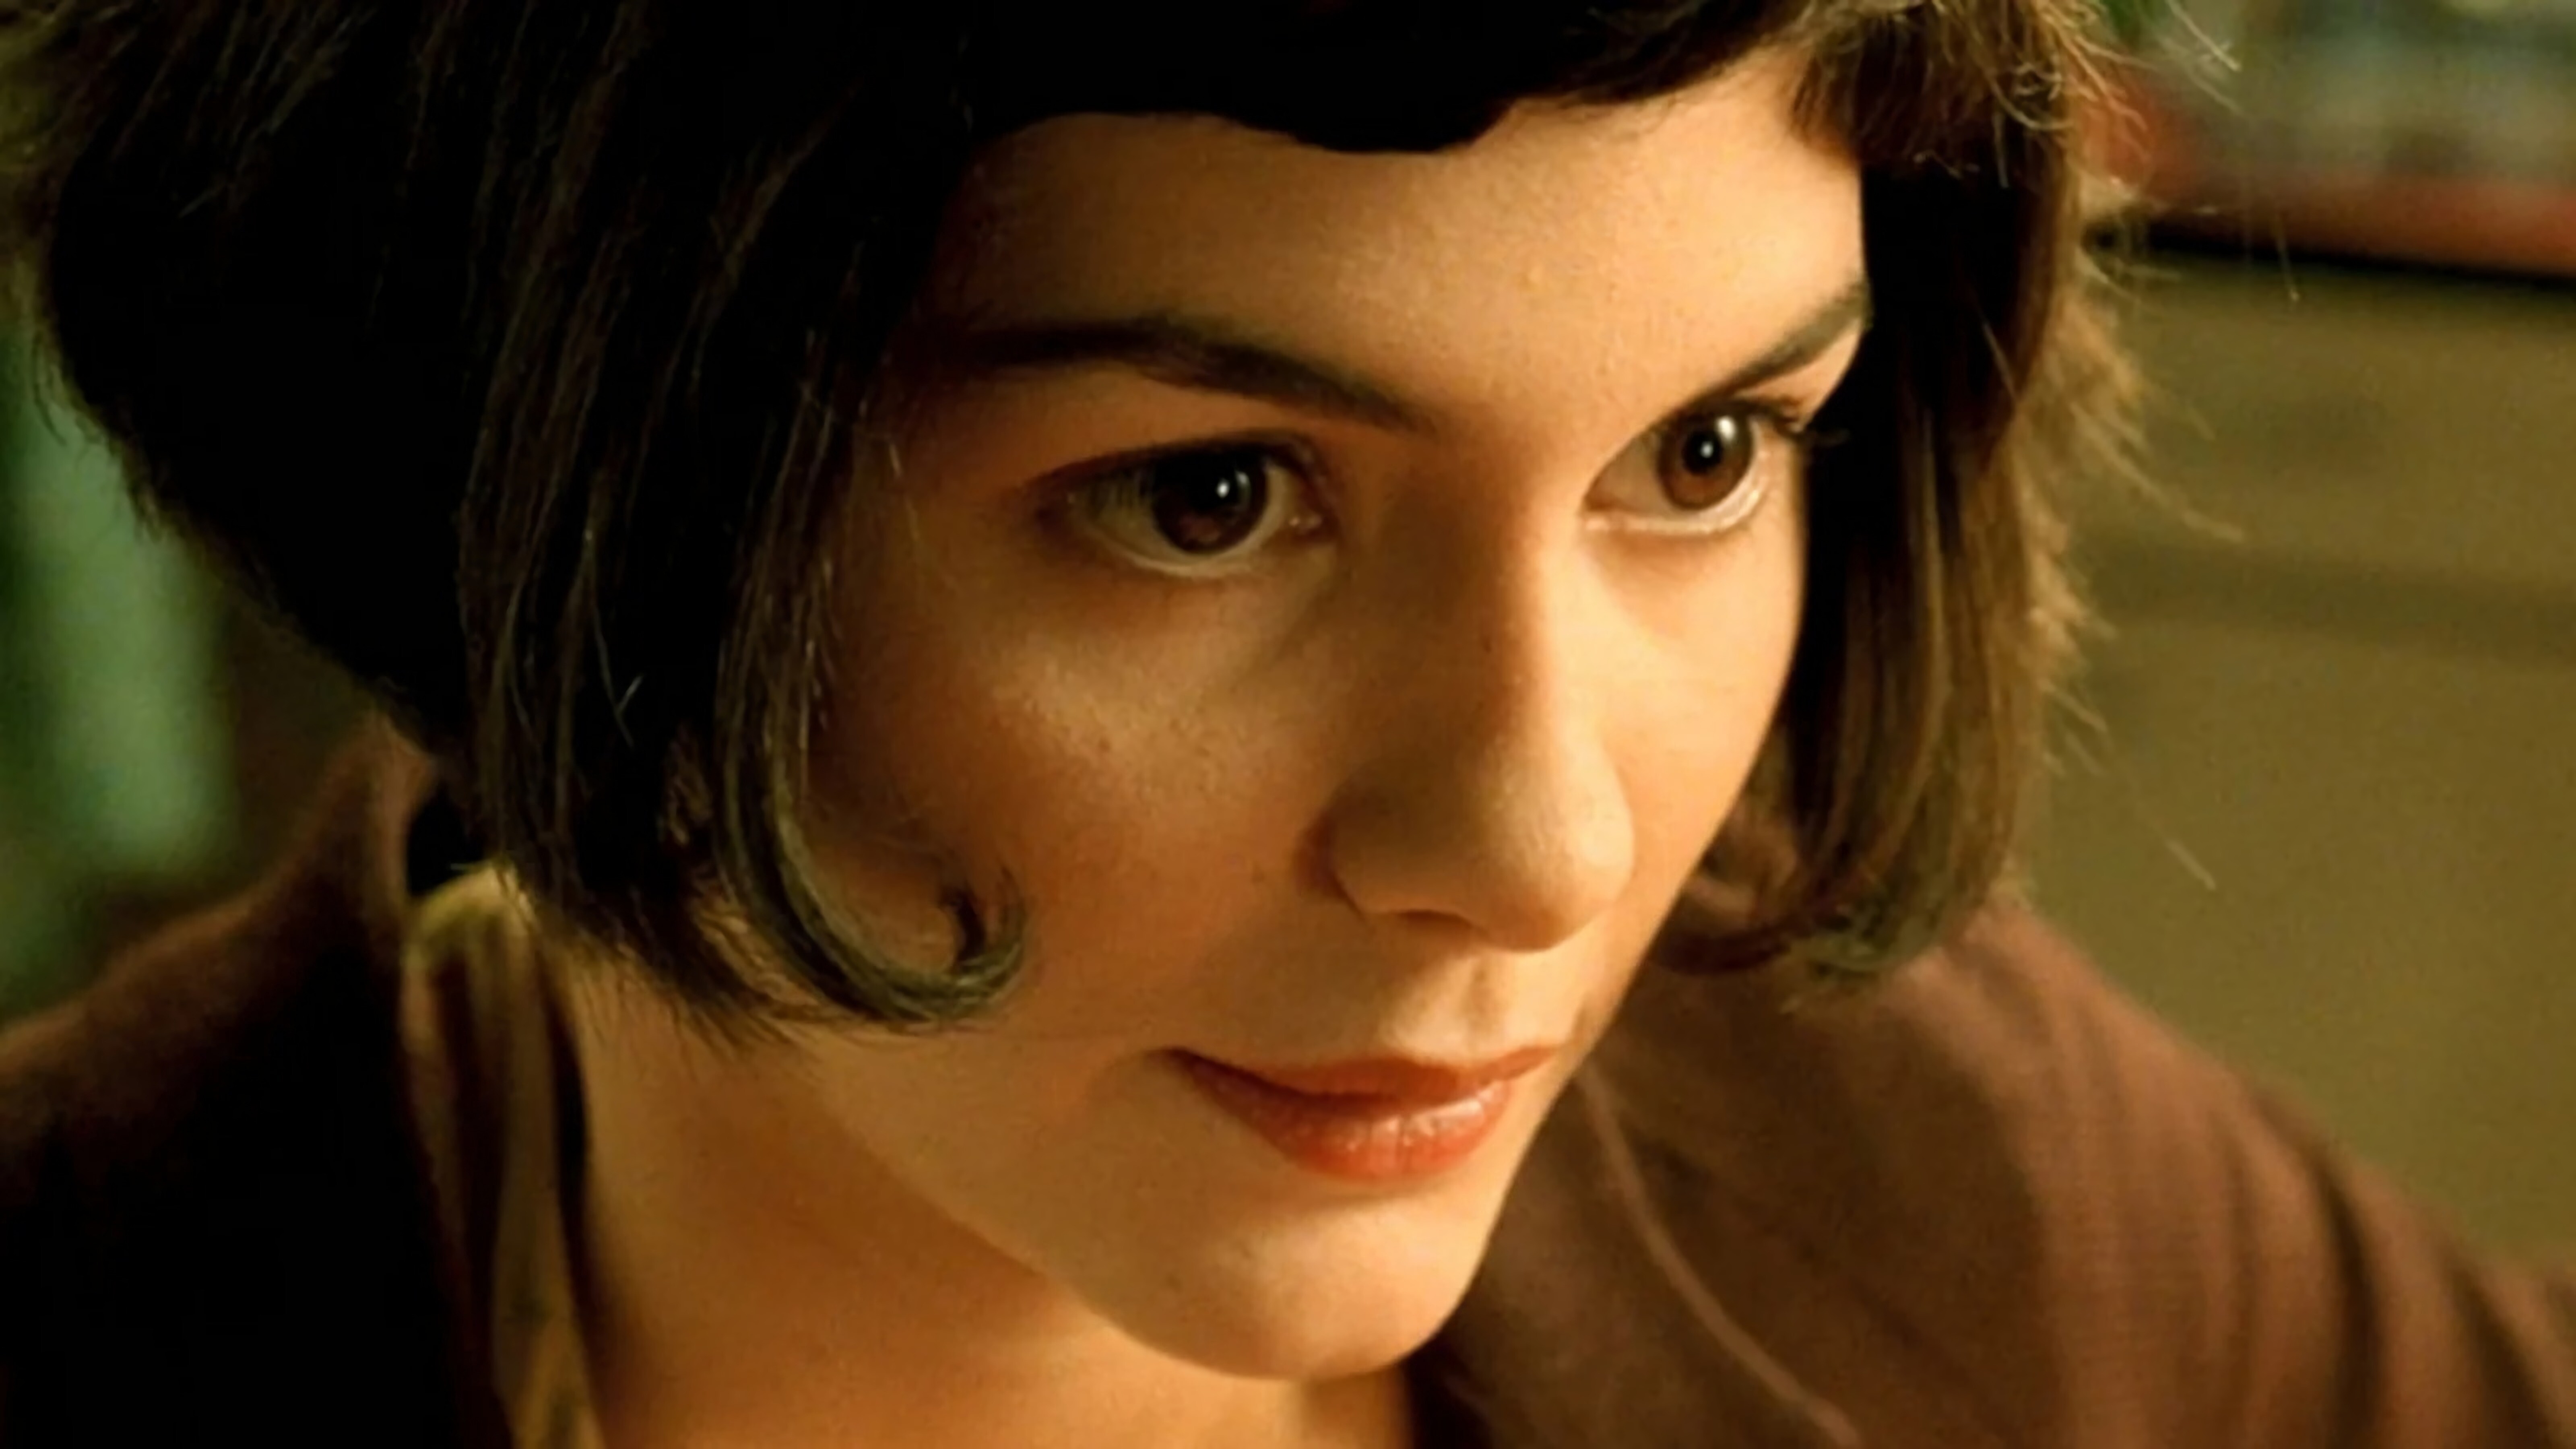 Amelie: Audrey Tautou played a shy waitress who decides to change the lives of those around her. 6400x3600 4K Wallpaper.